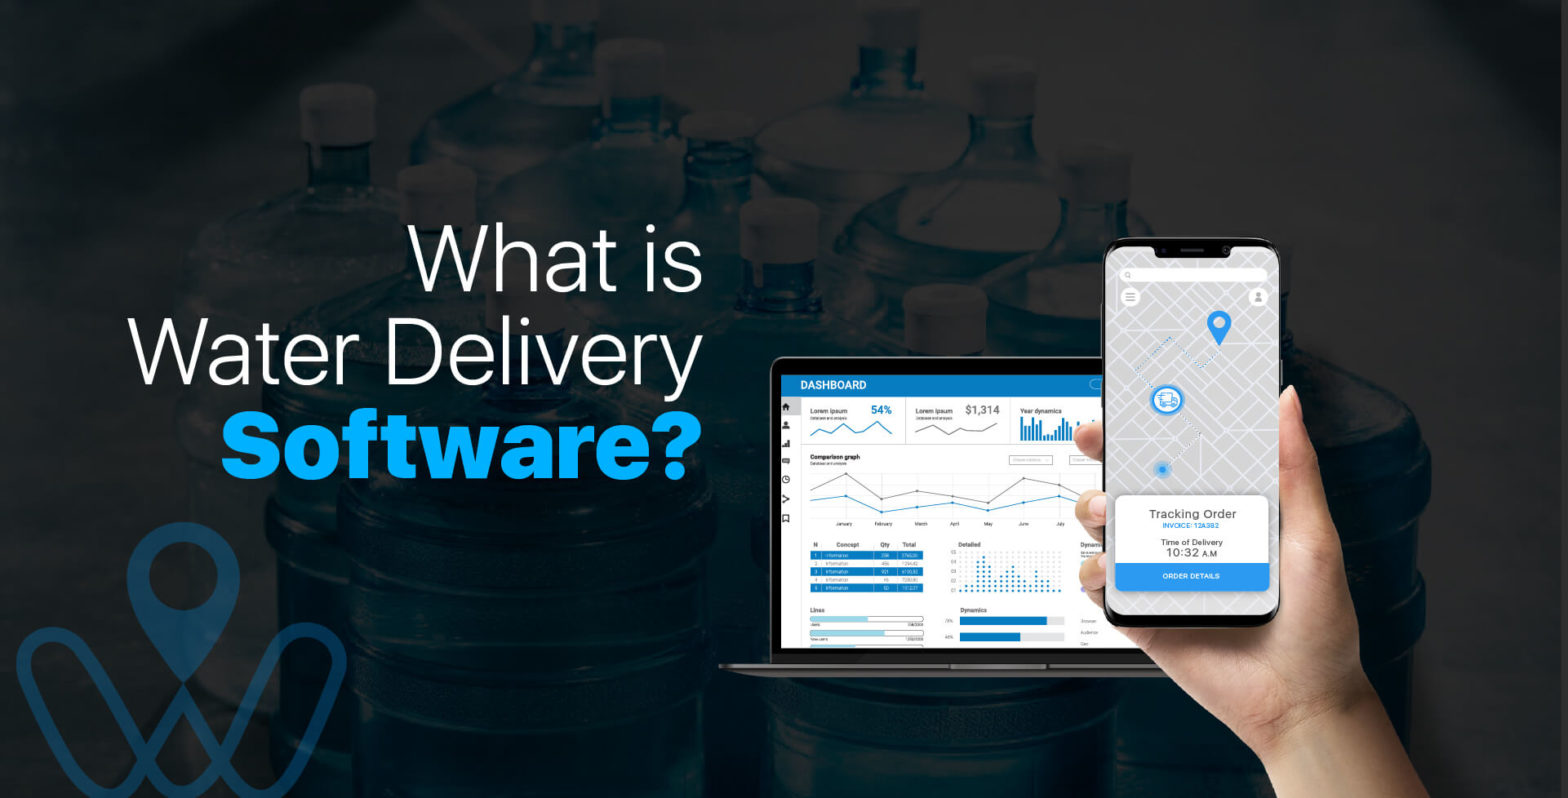 What is water delivery software by Water Delivery Solutions